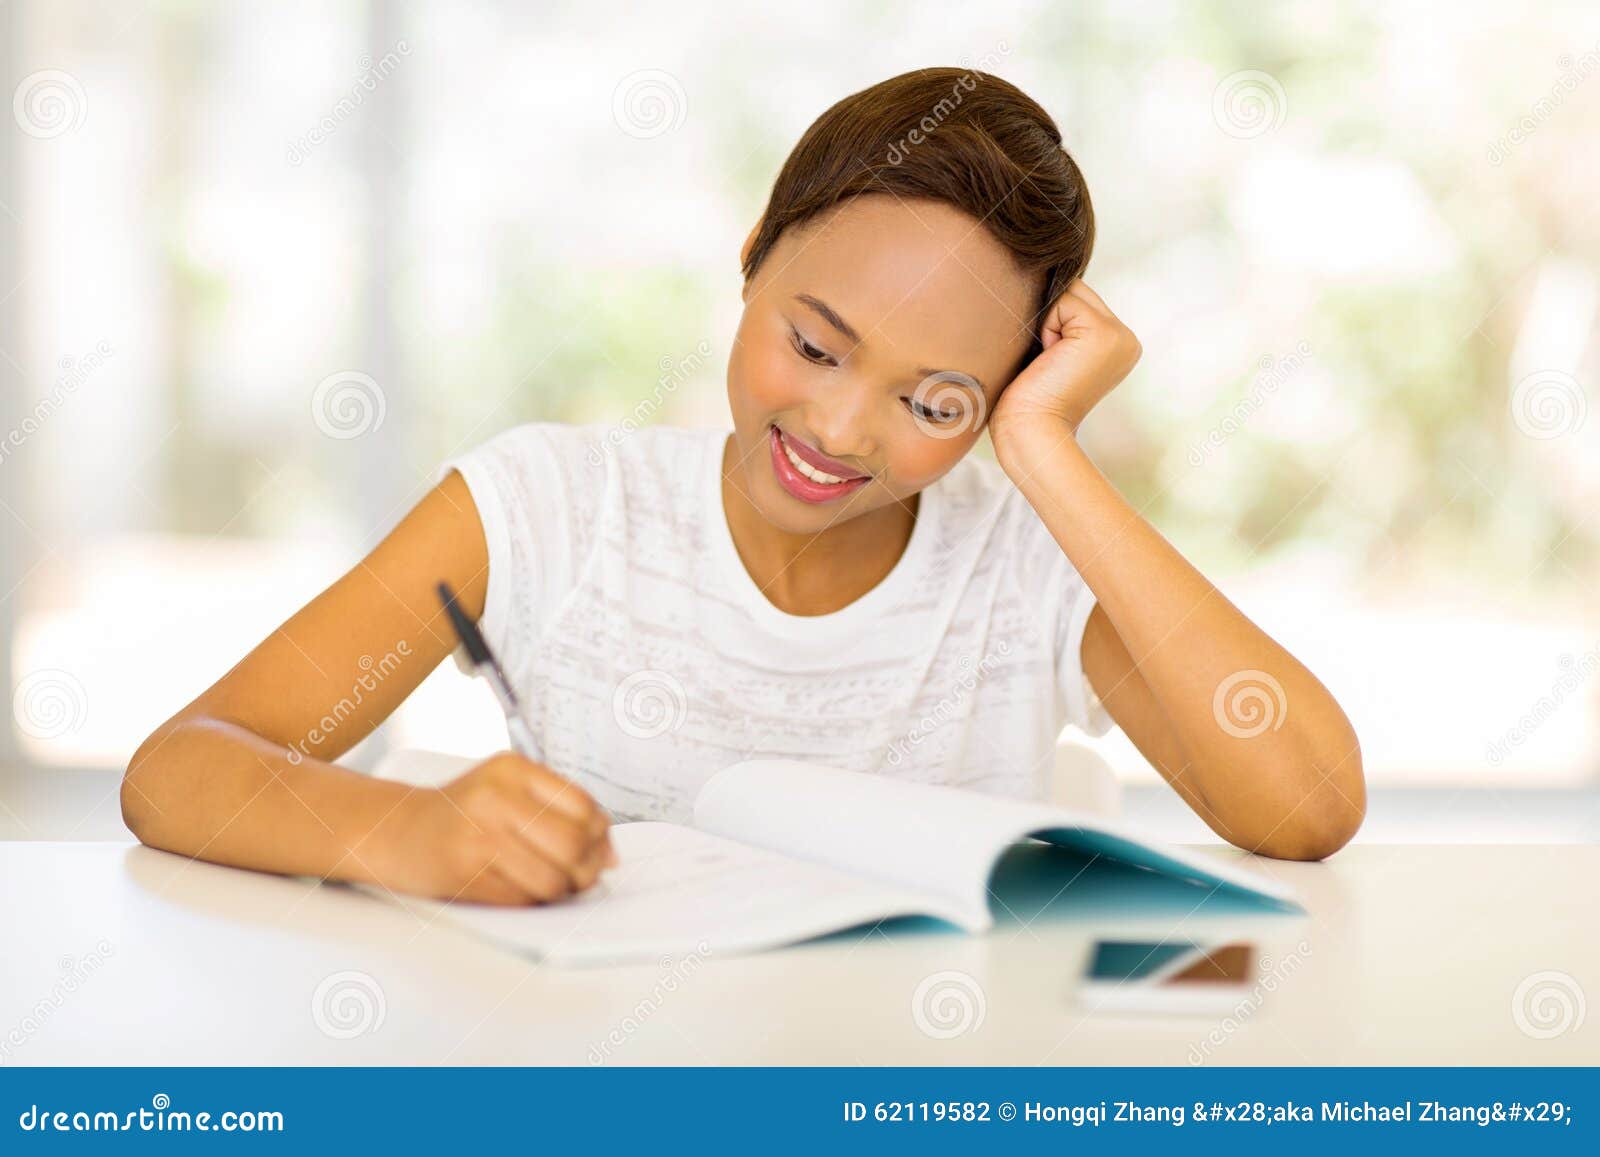 Get a High-Quality Paper at Our Cheap Essay Writing Service